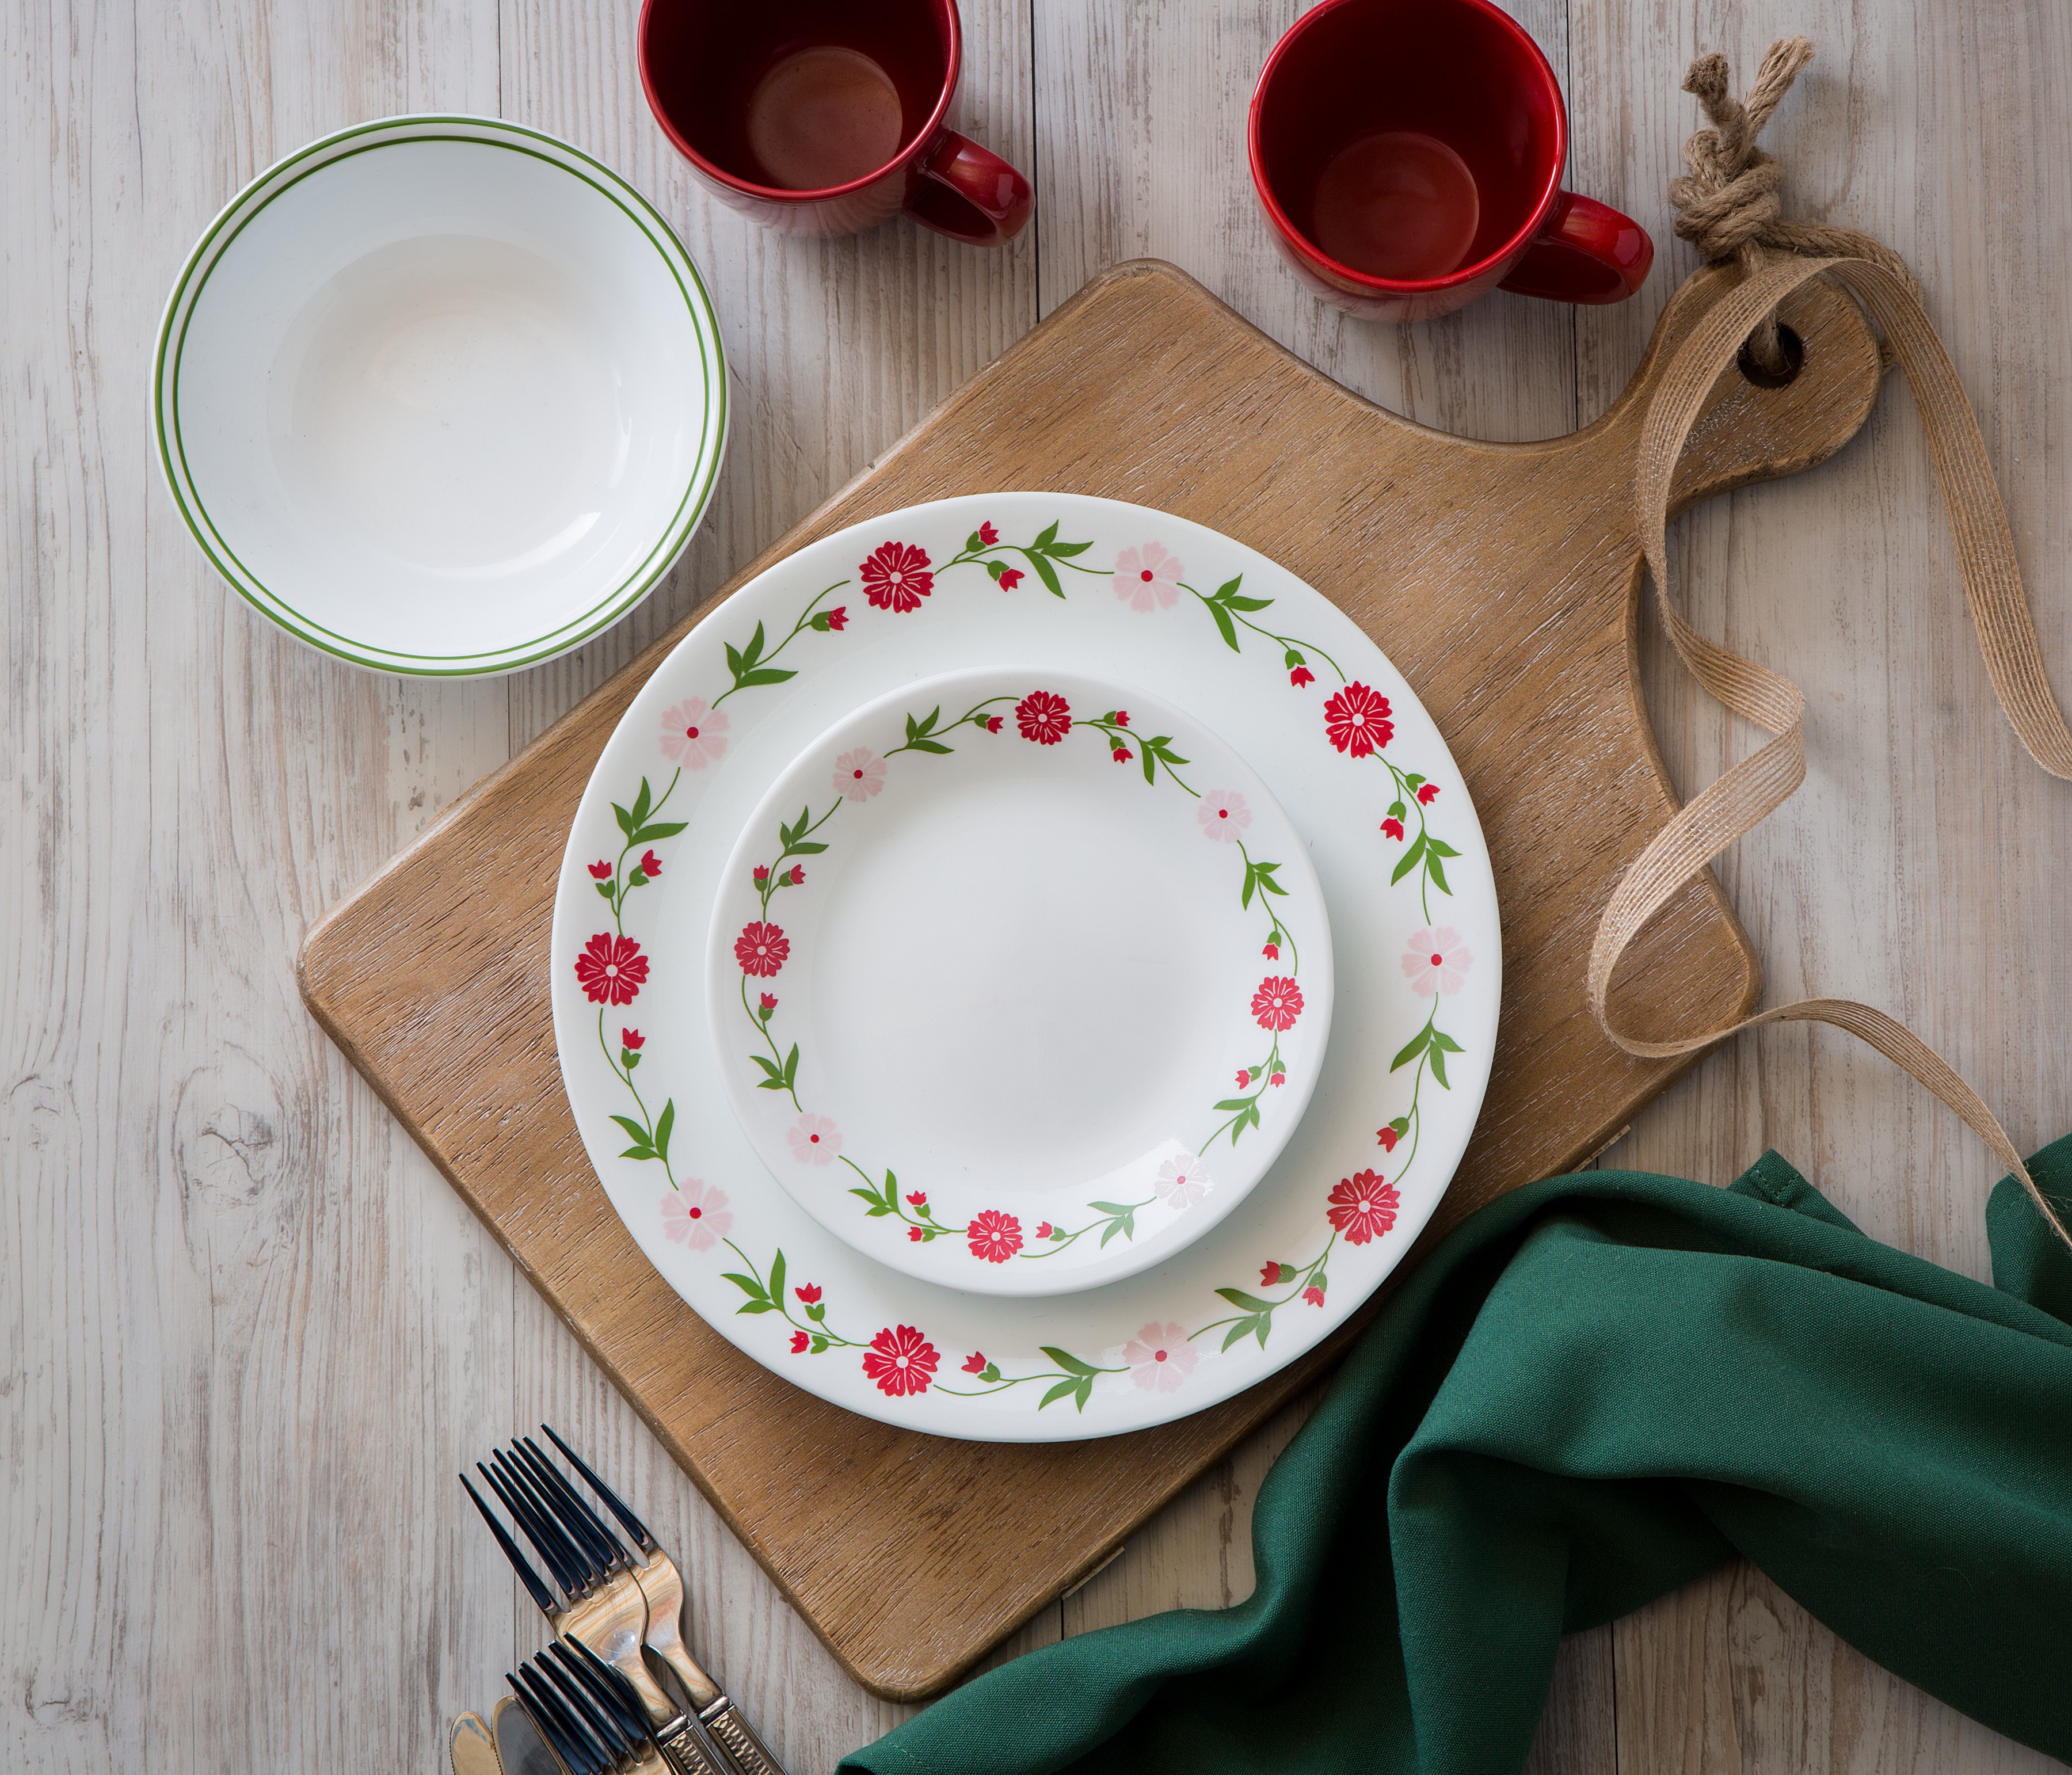 Is It A Good Idea To Invest In Corelle?